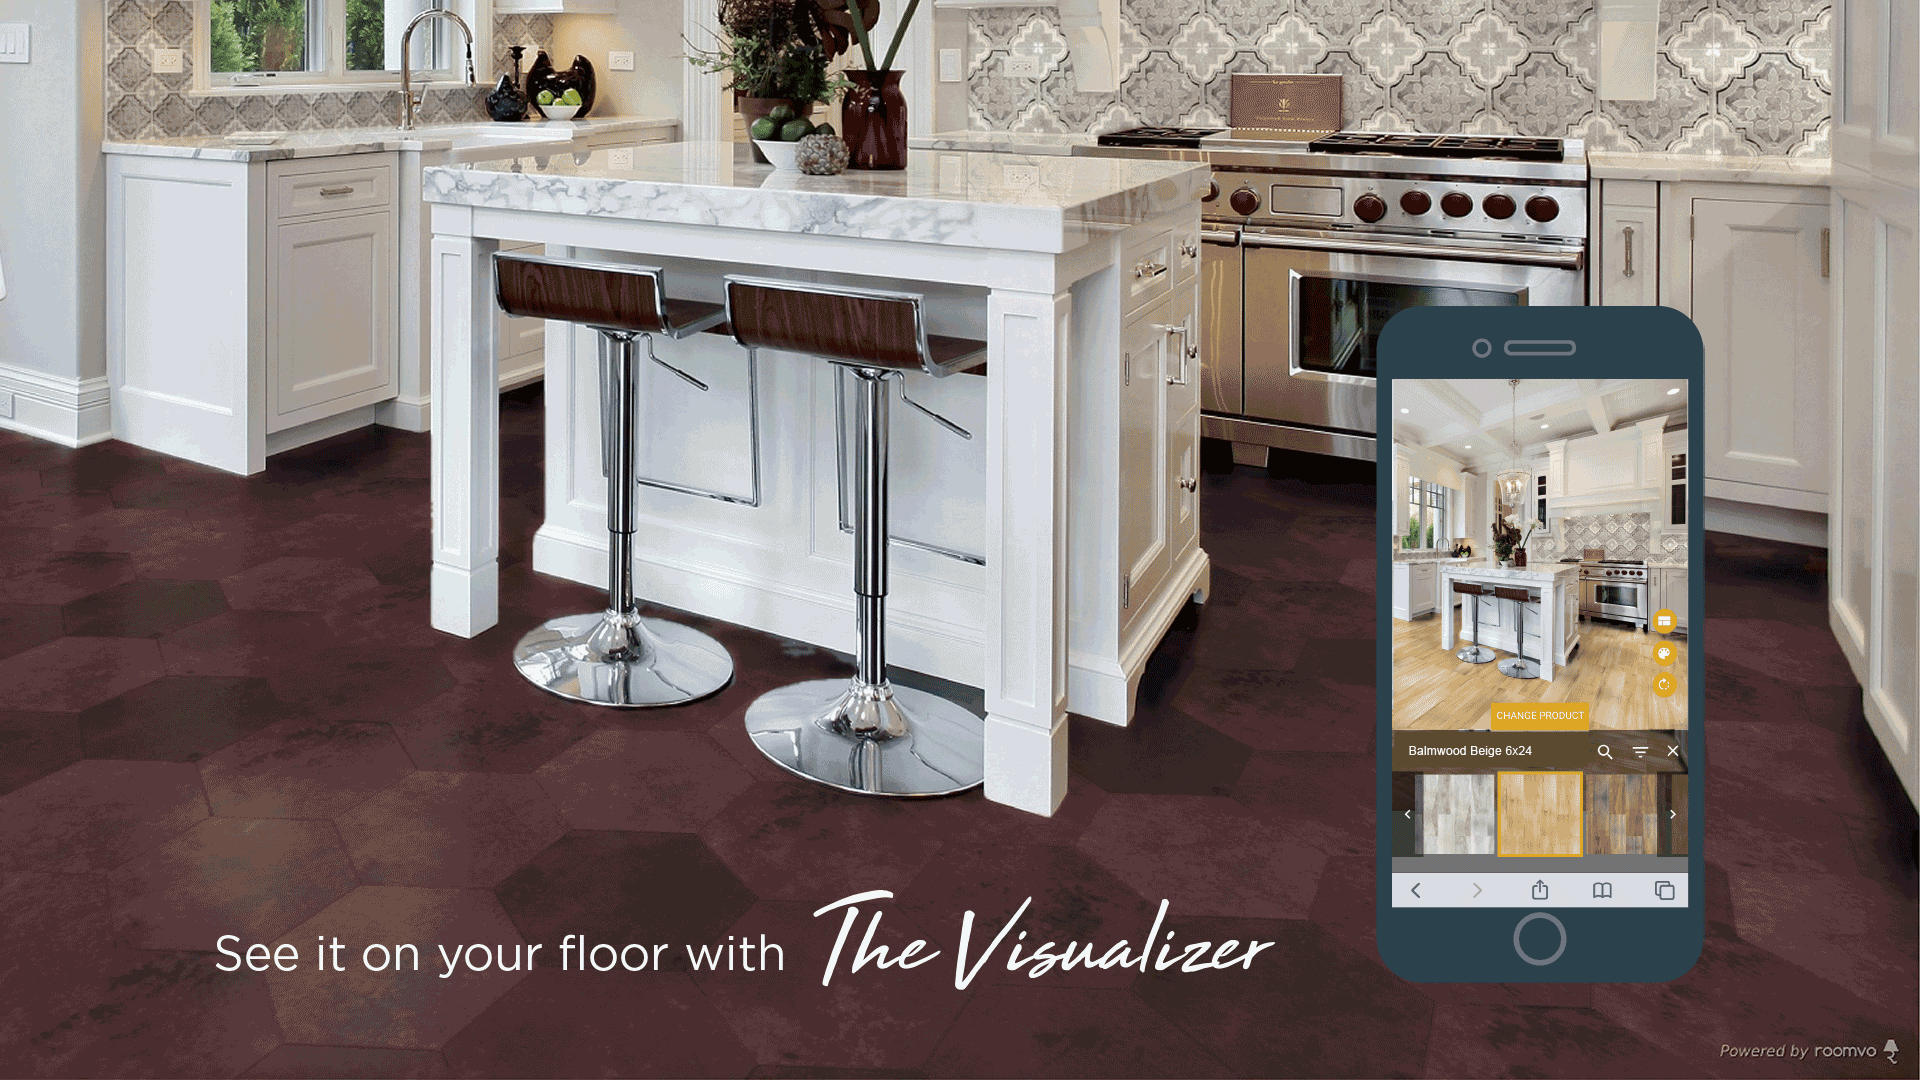 See it on your floor with Tile Americas Visualizer